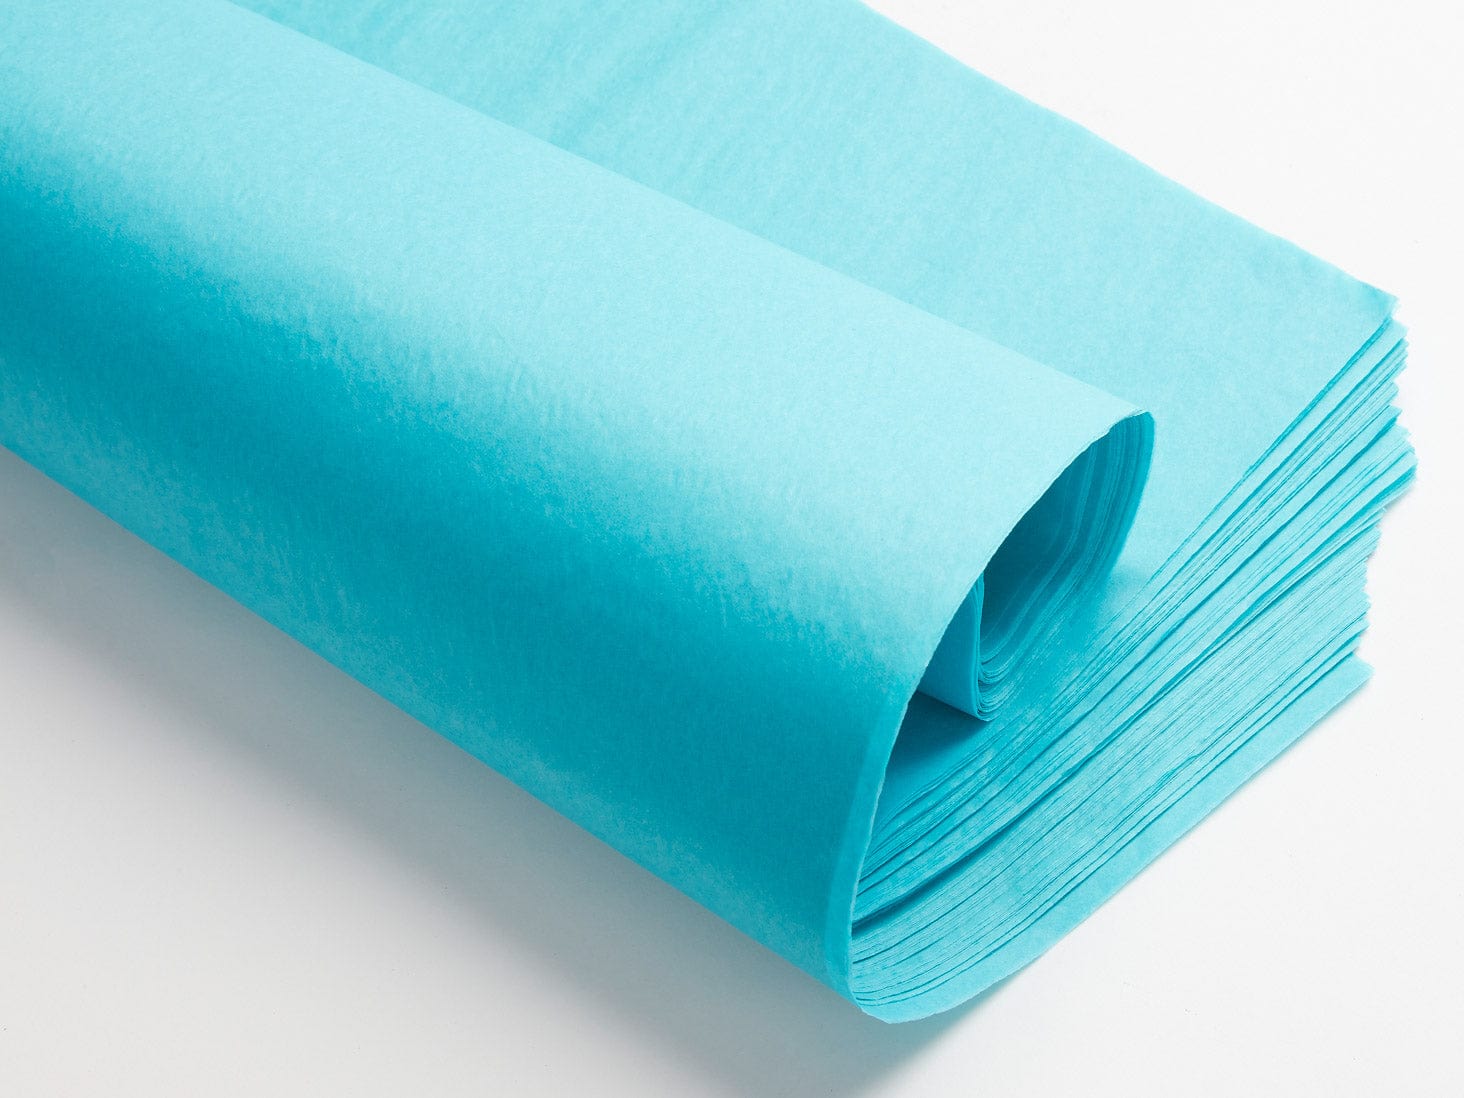 Misty Turquoise Luxury Tissue Paper 240 Sheets